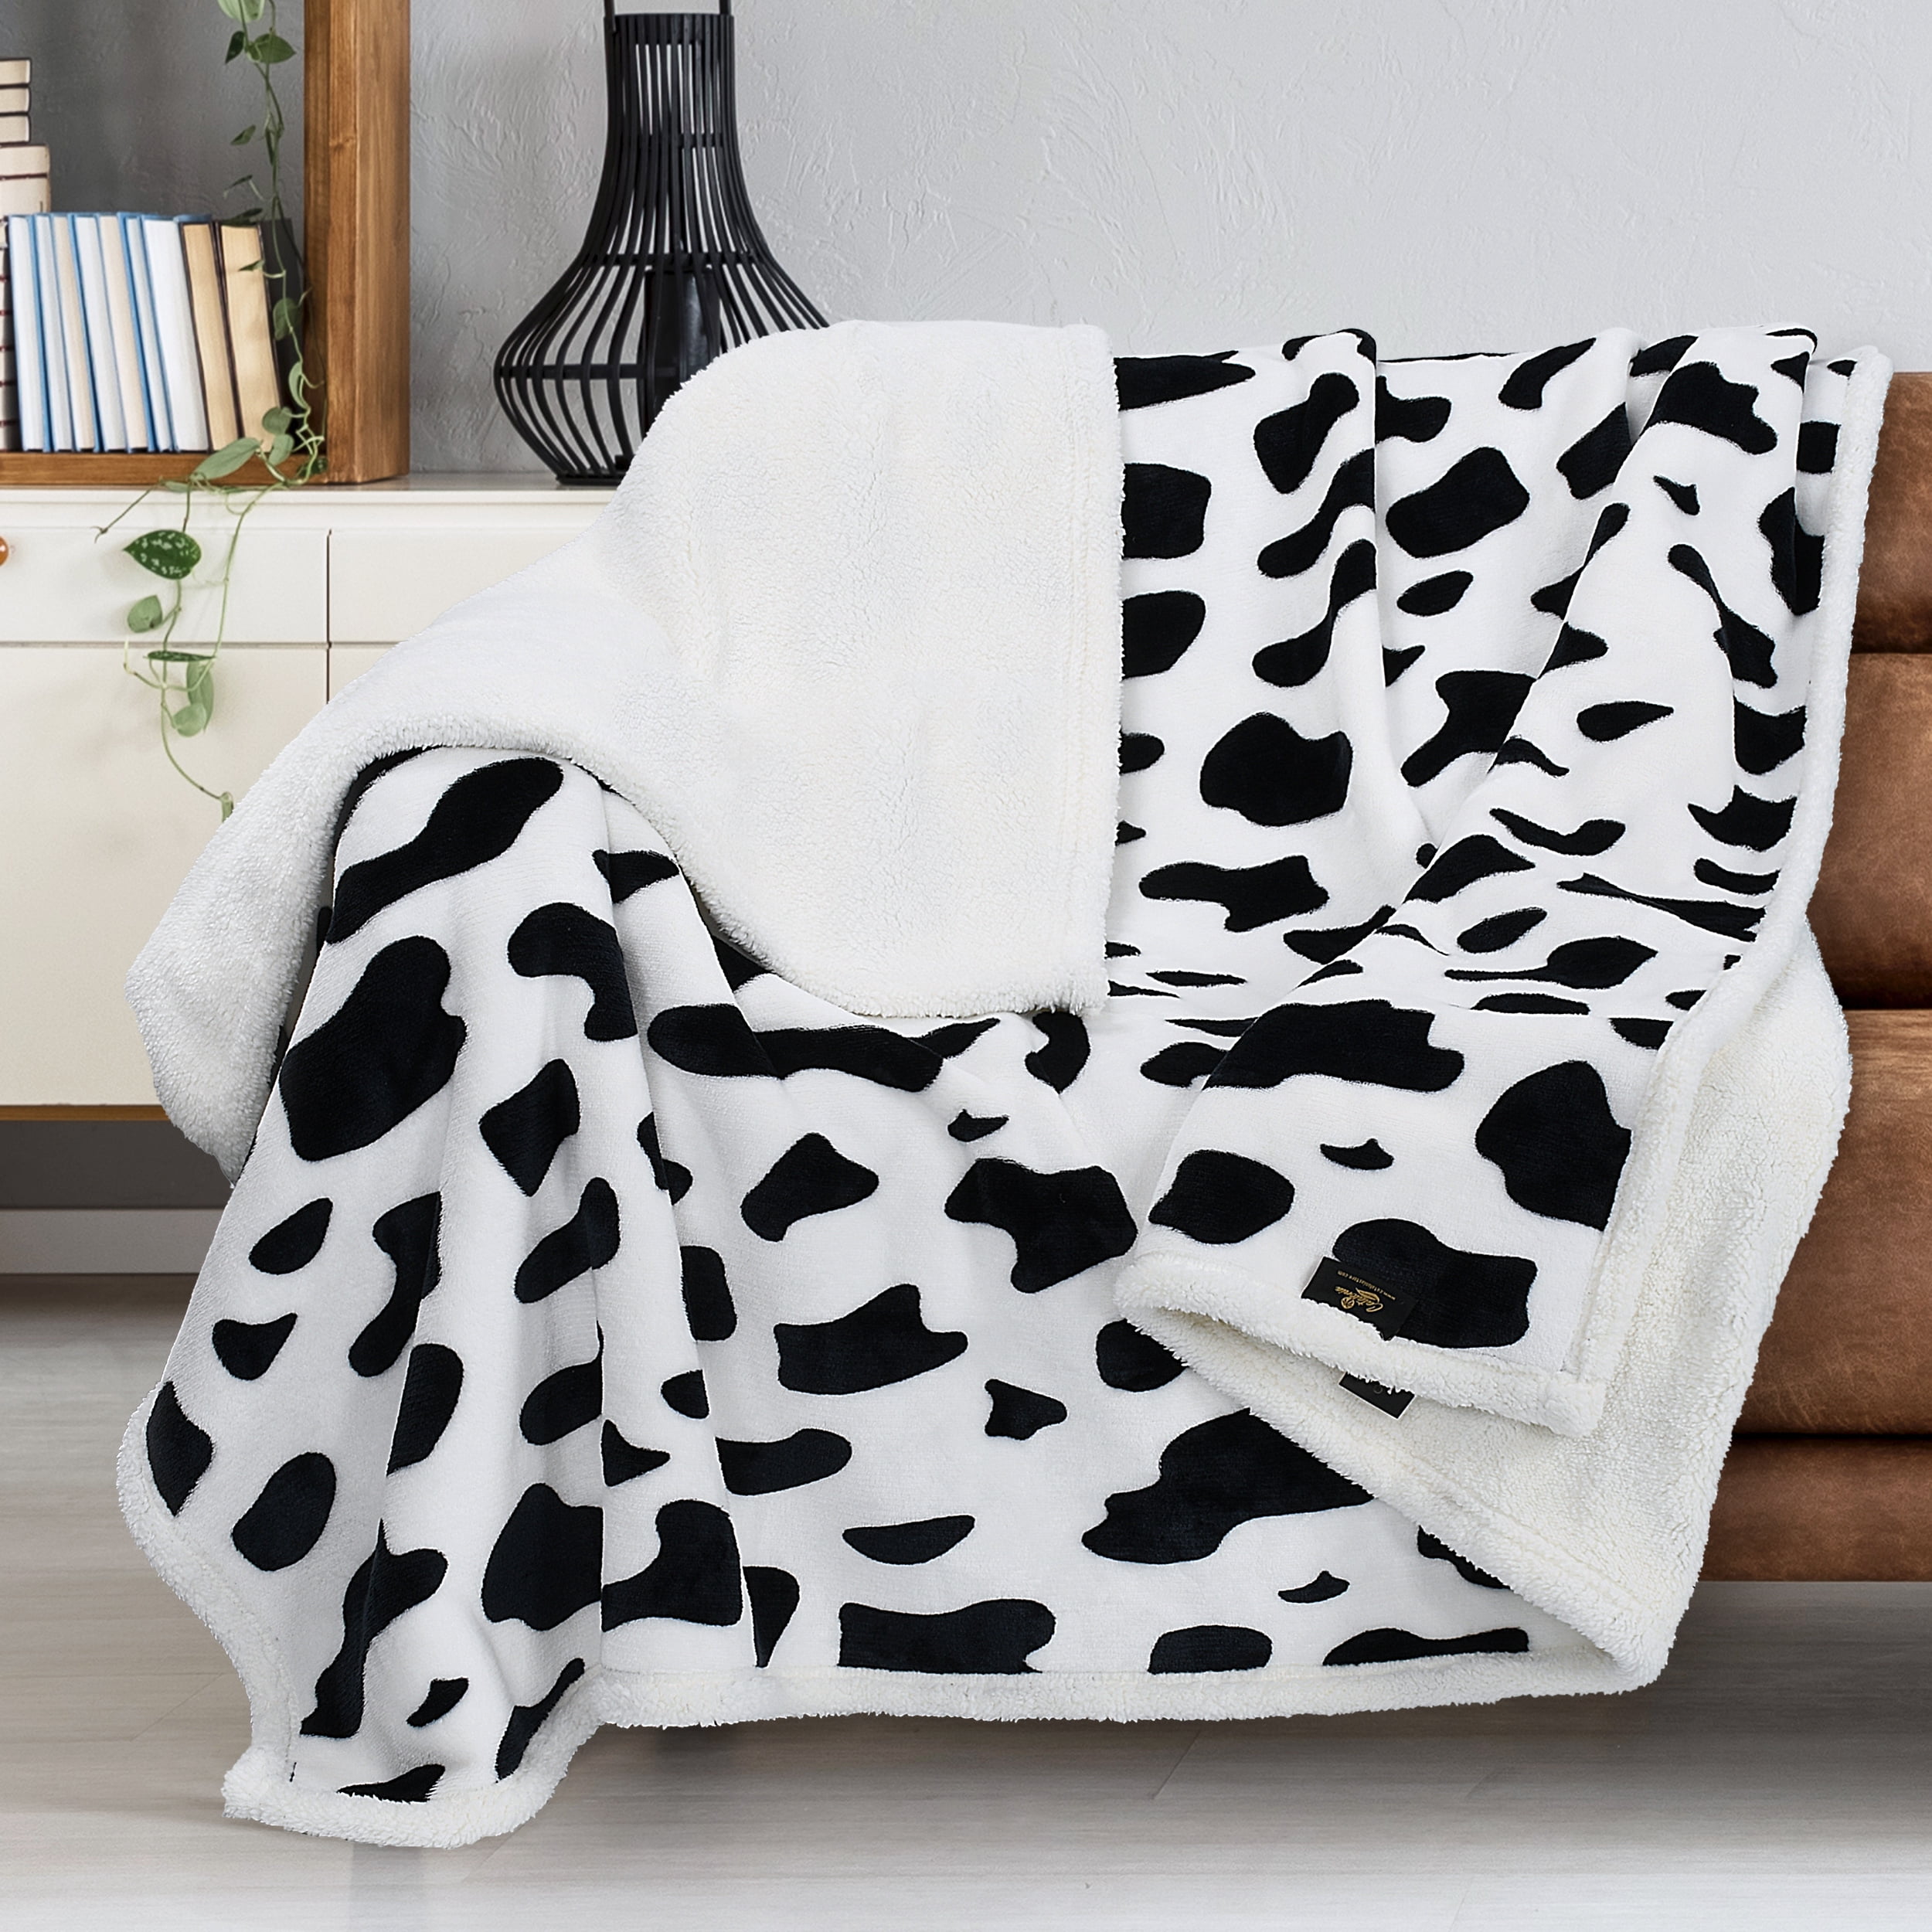 Fleece Blanket Super Soft Throw Blankets for Couch,Sofa,Or Bed Warm and Cozy for All Seasons-Stranger Print Gifts for Kids50 X40